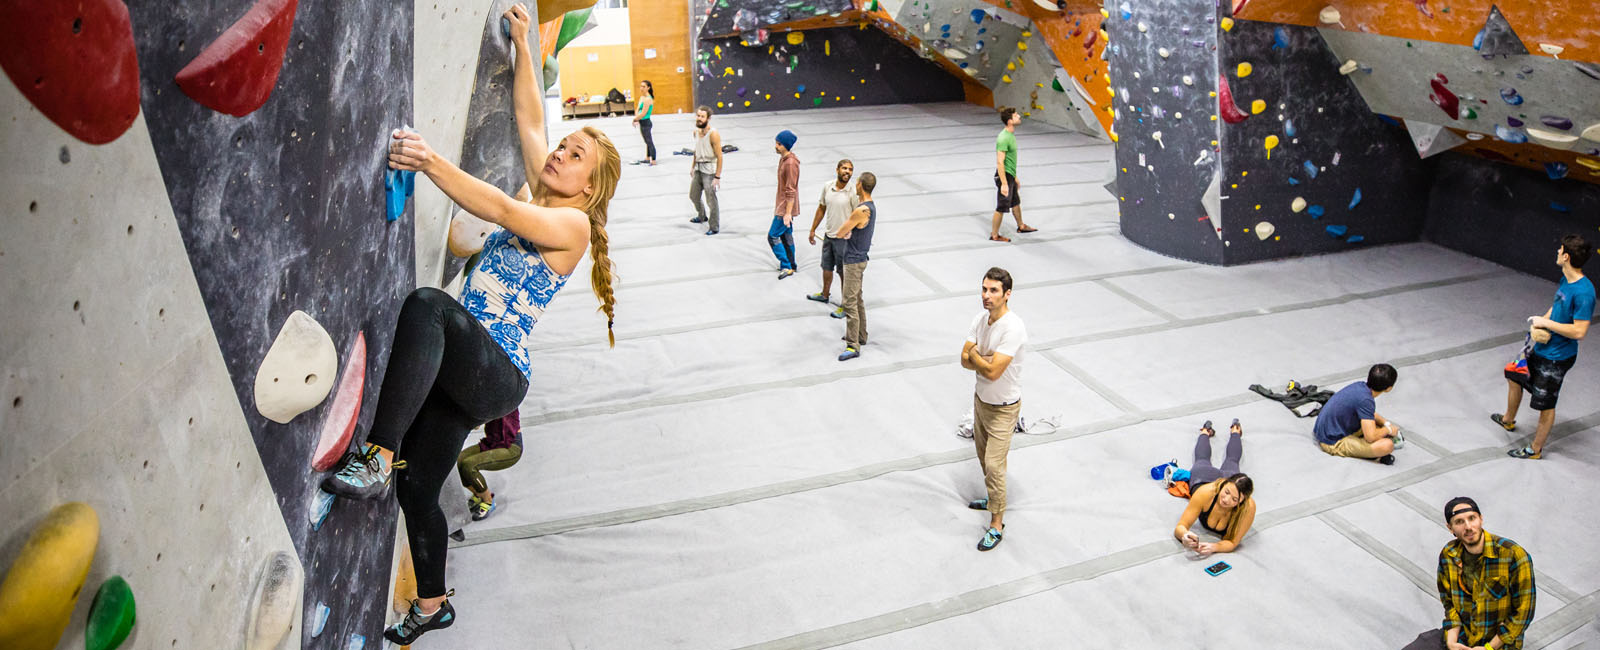 blonde girl with braid bouldering